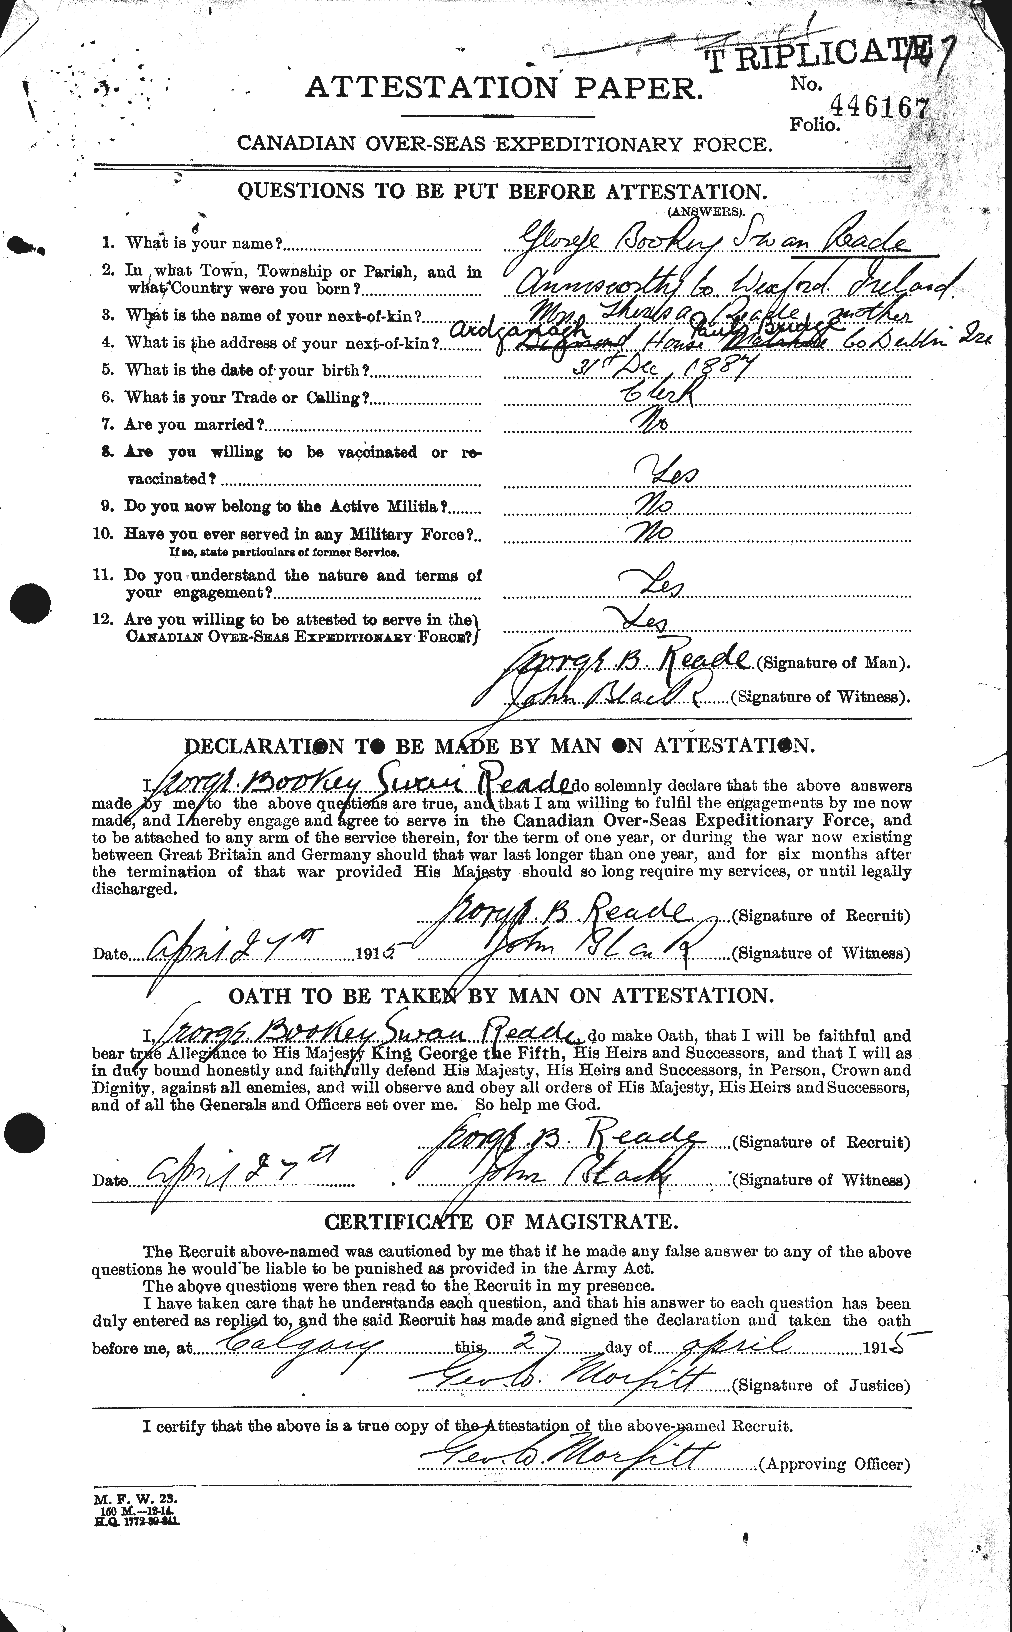 Personnel Records of the First World War - CEF 598364a